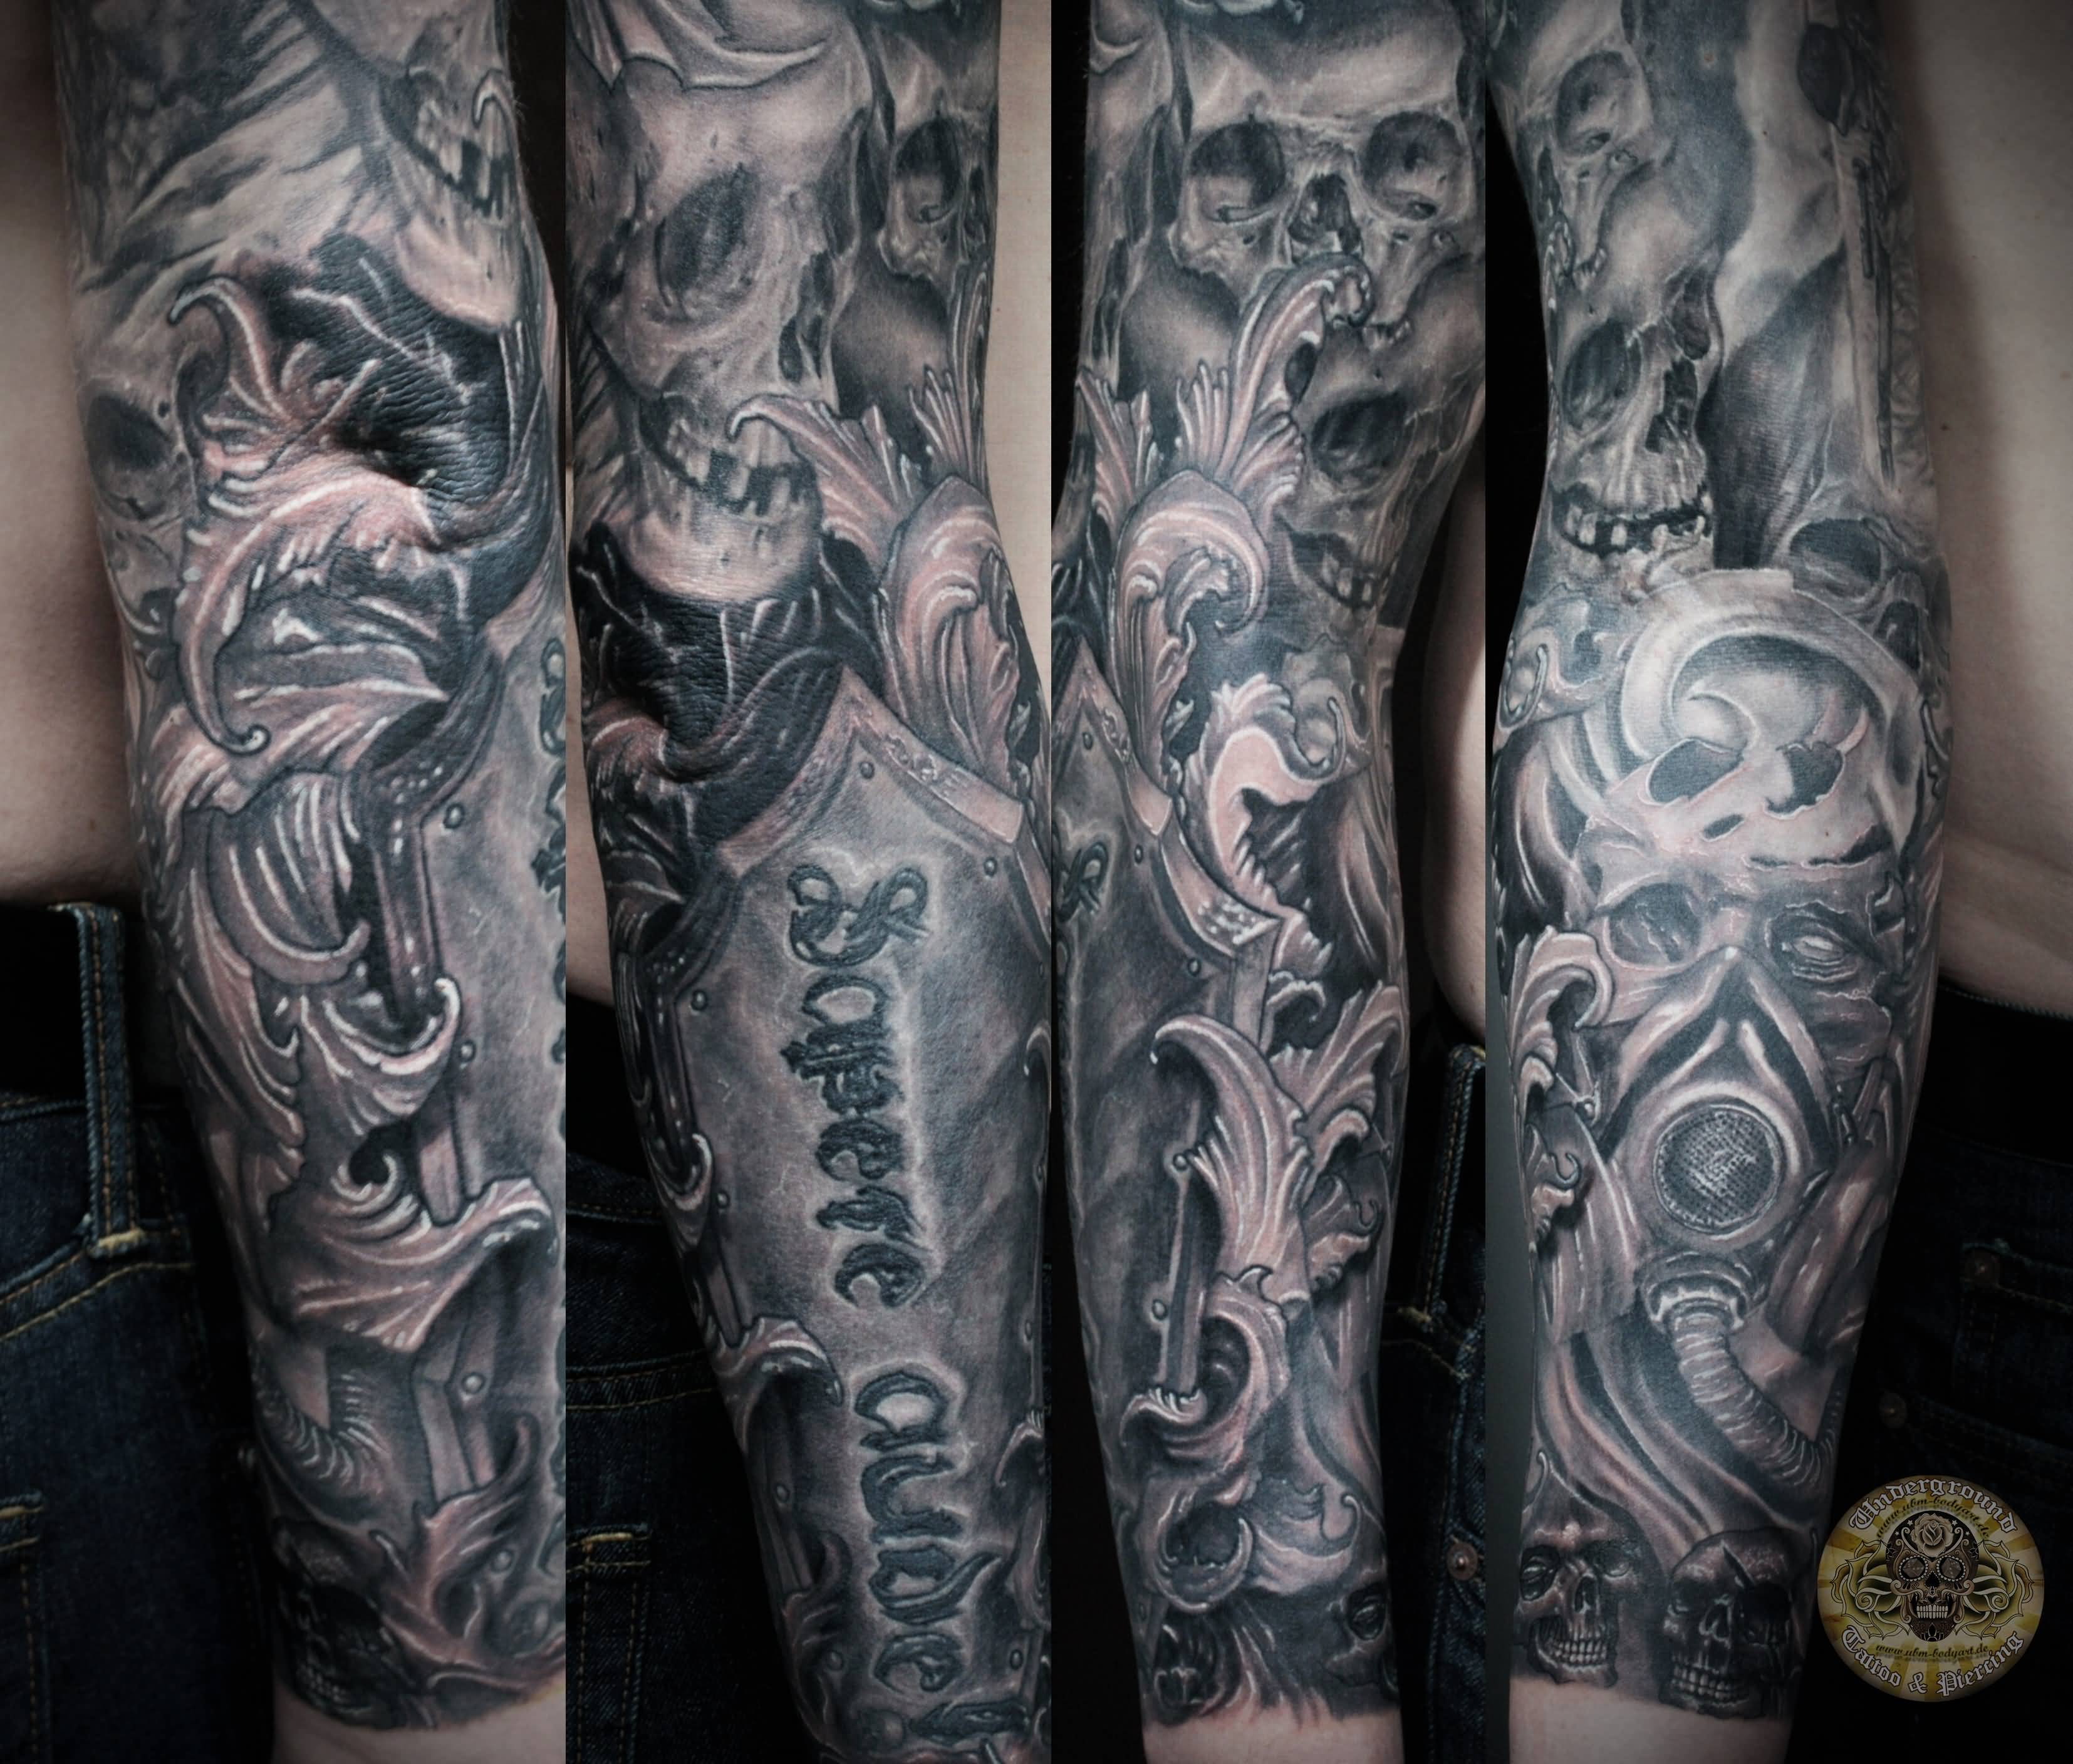 Unique Black And Grey Pirate Skull Tattoo Design For Full Sleeve By 2Face